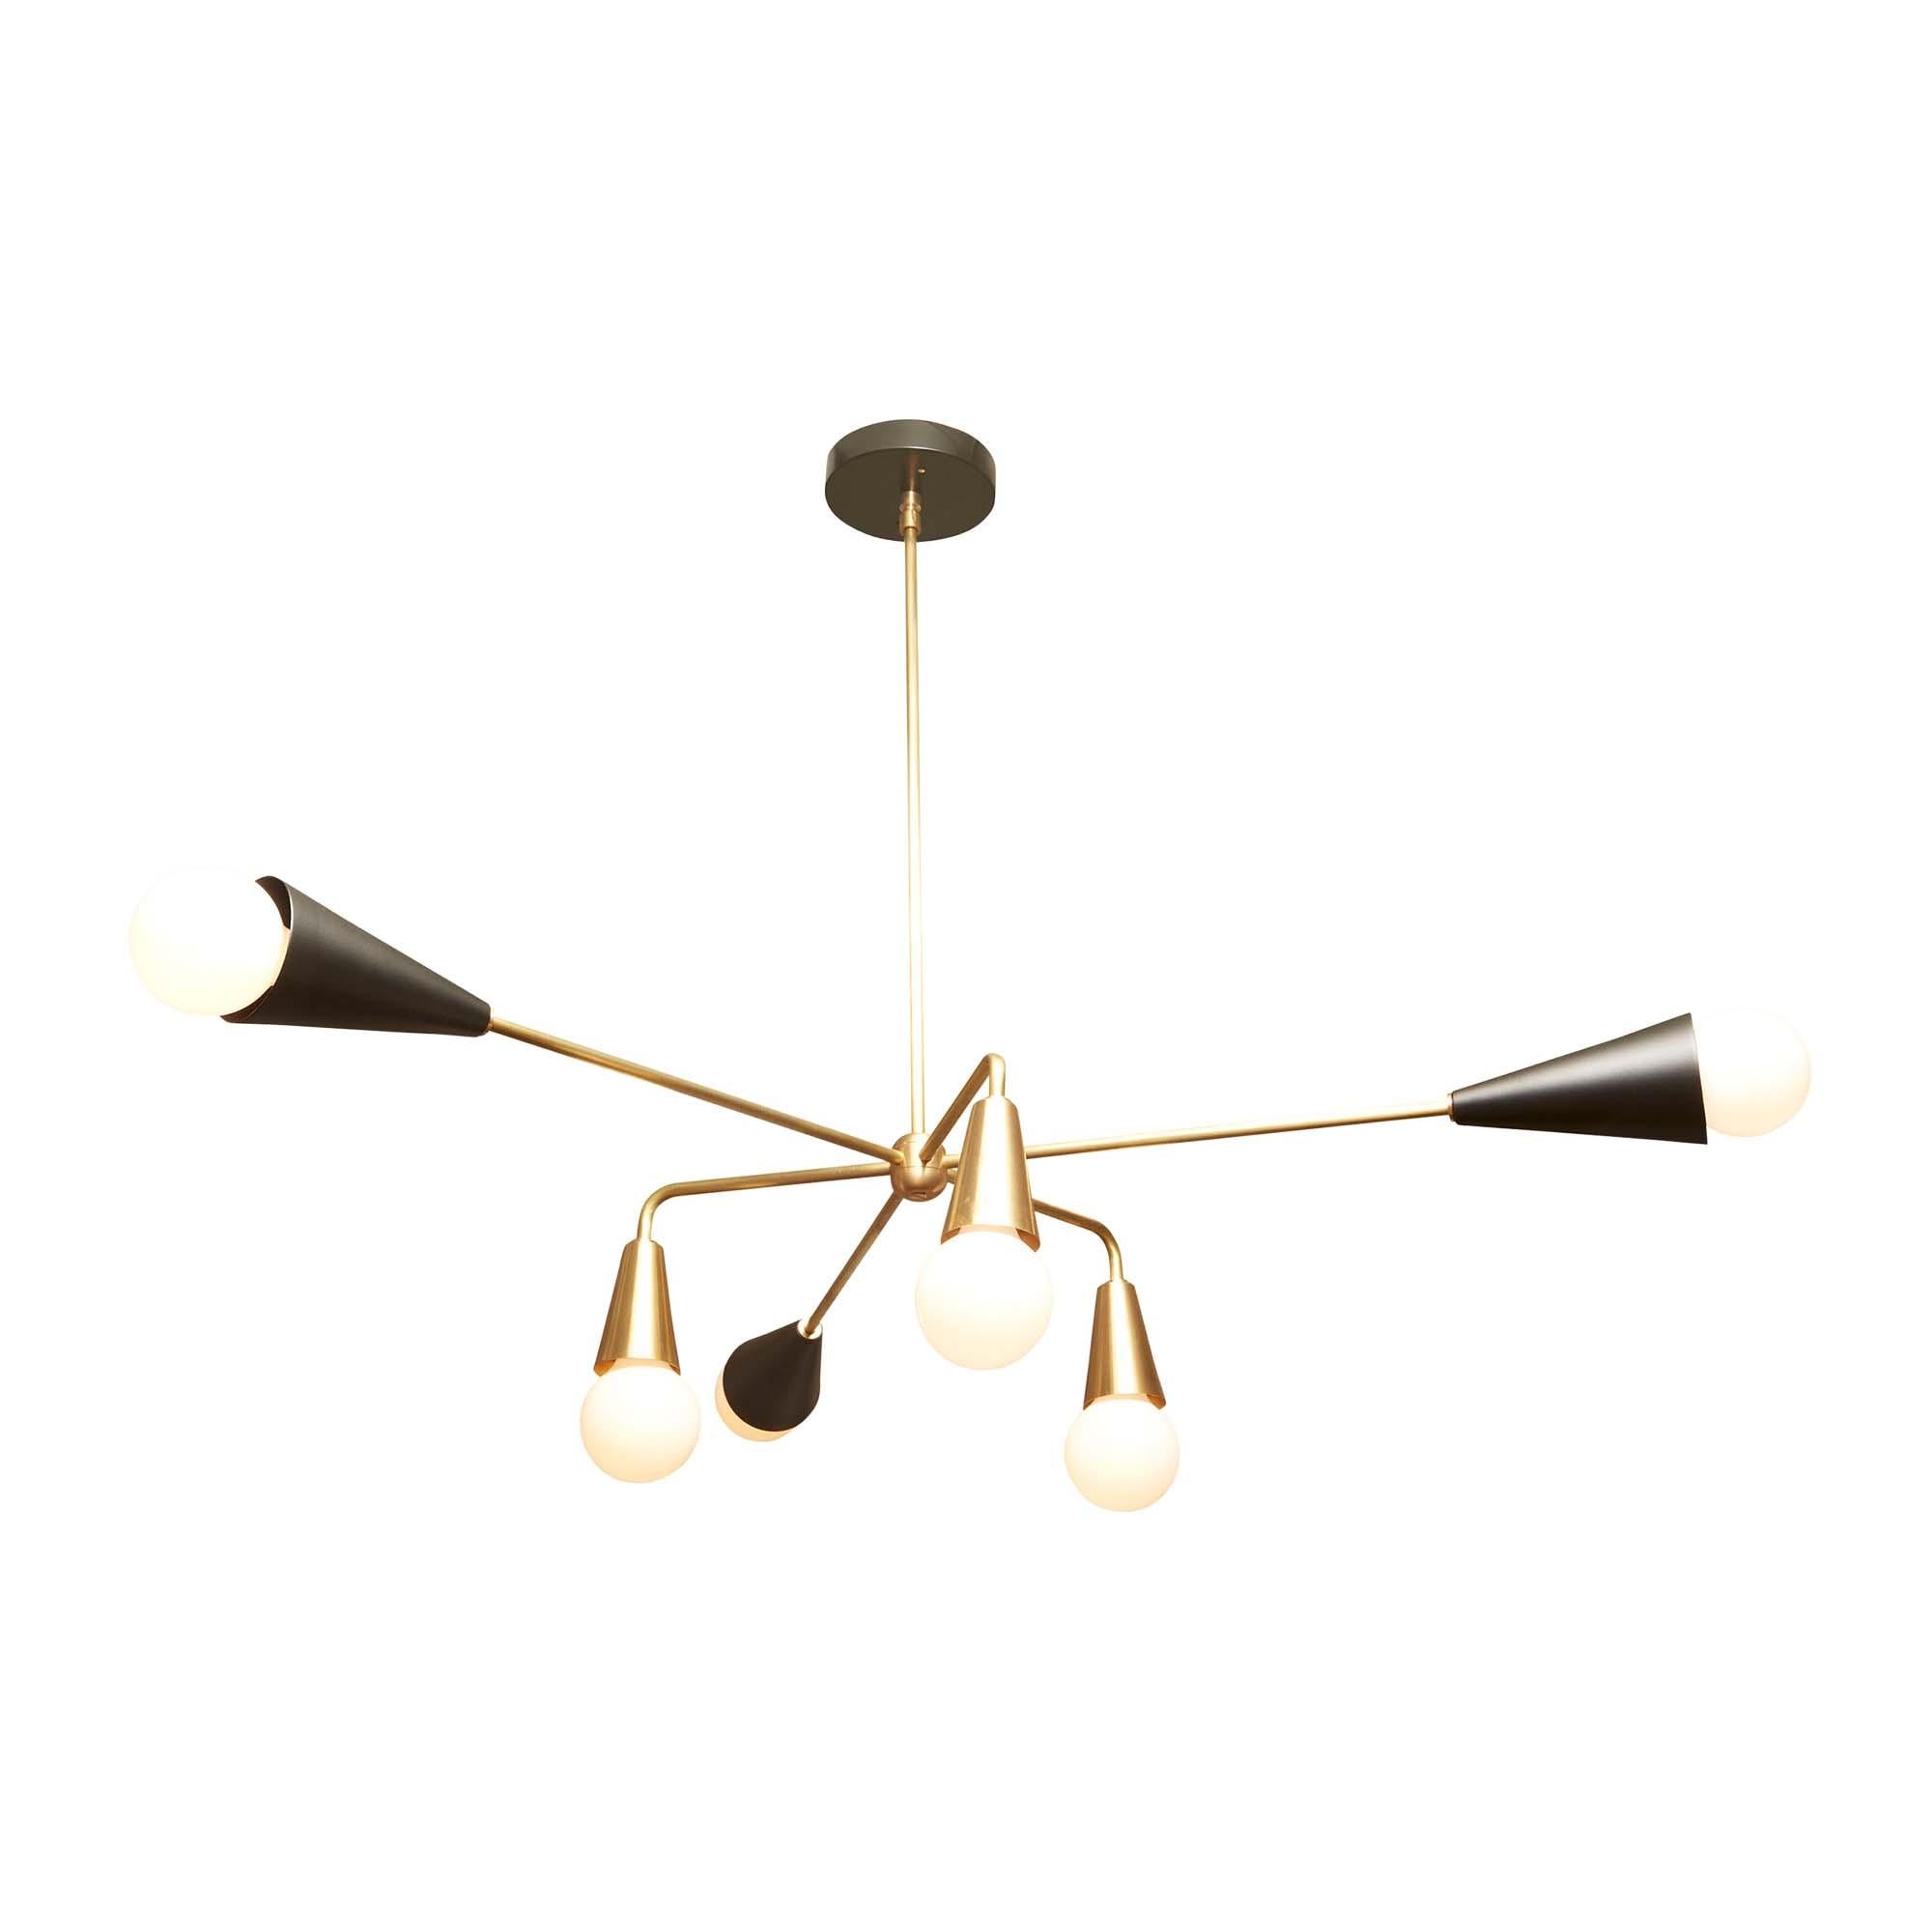 The XL 6-globe chandelier features six arms that are centered on a brass rod. Three of the globes are angled down with brass shades. The other three have powdercoated shades.

The Lawson-Fenning collection is designed and handmade in Los Angeles,